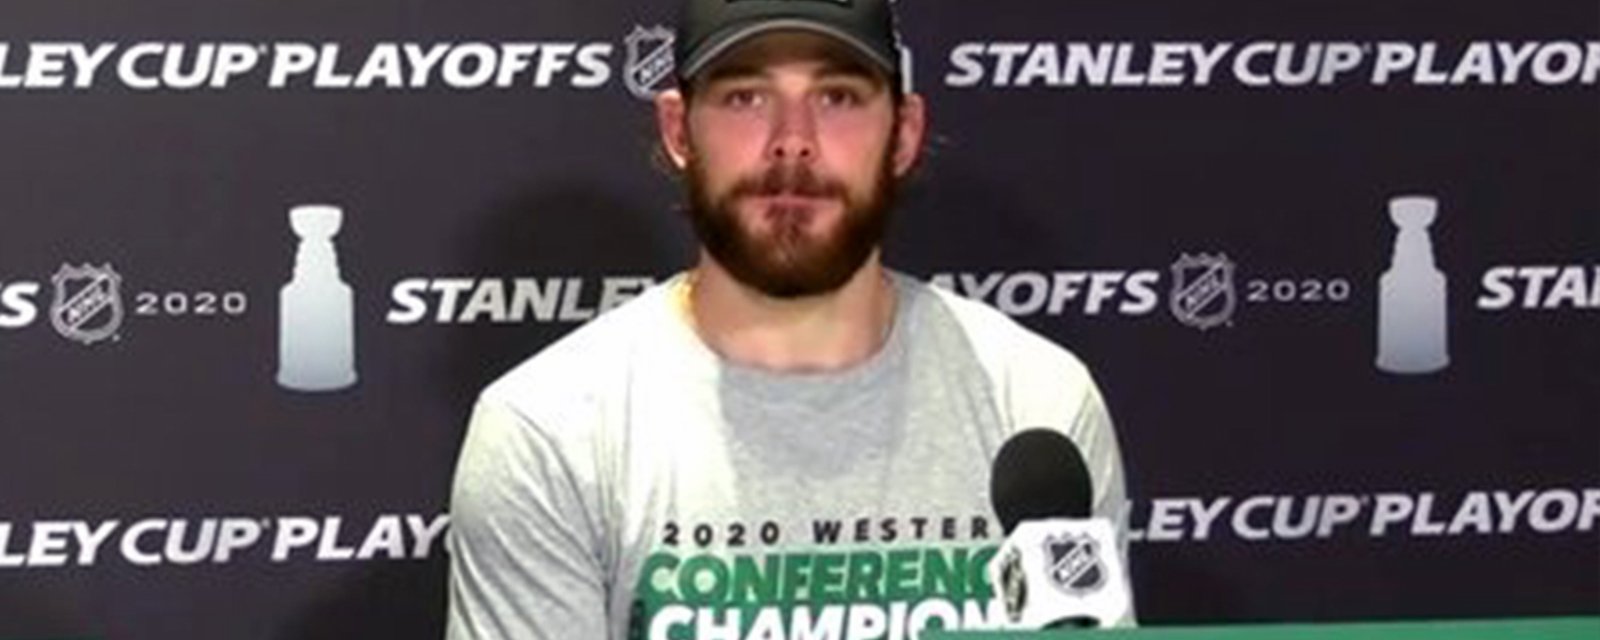 Seguin dunks on the entire analytics community after Stars advance to Stanley Cup Final